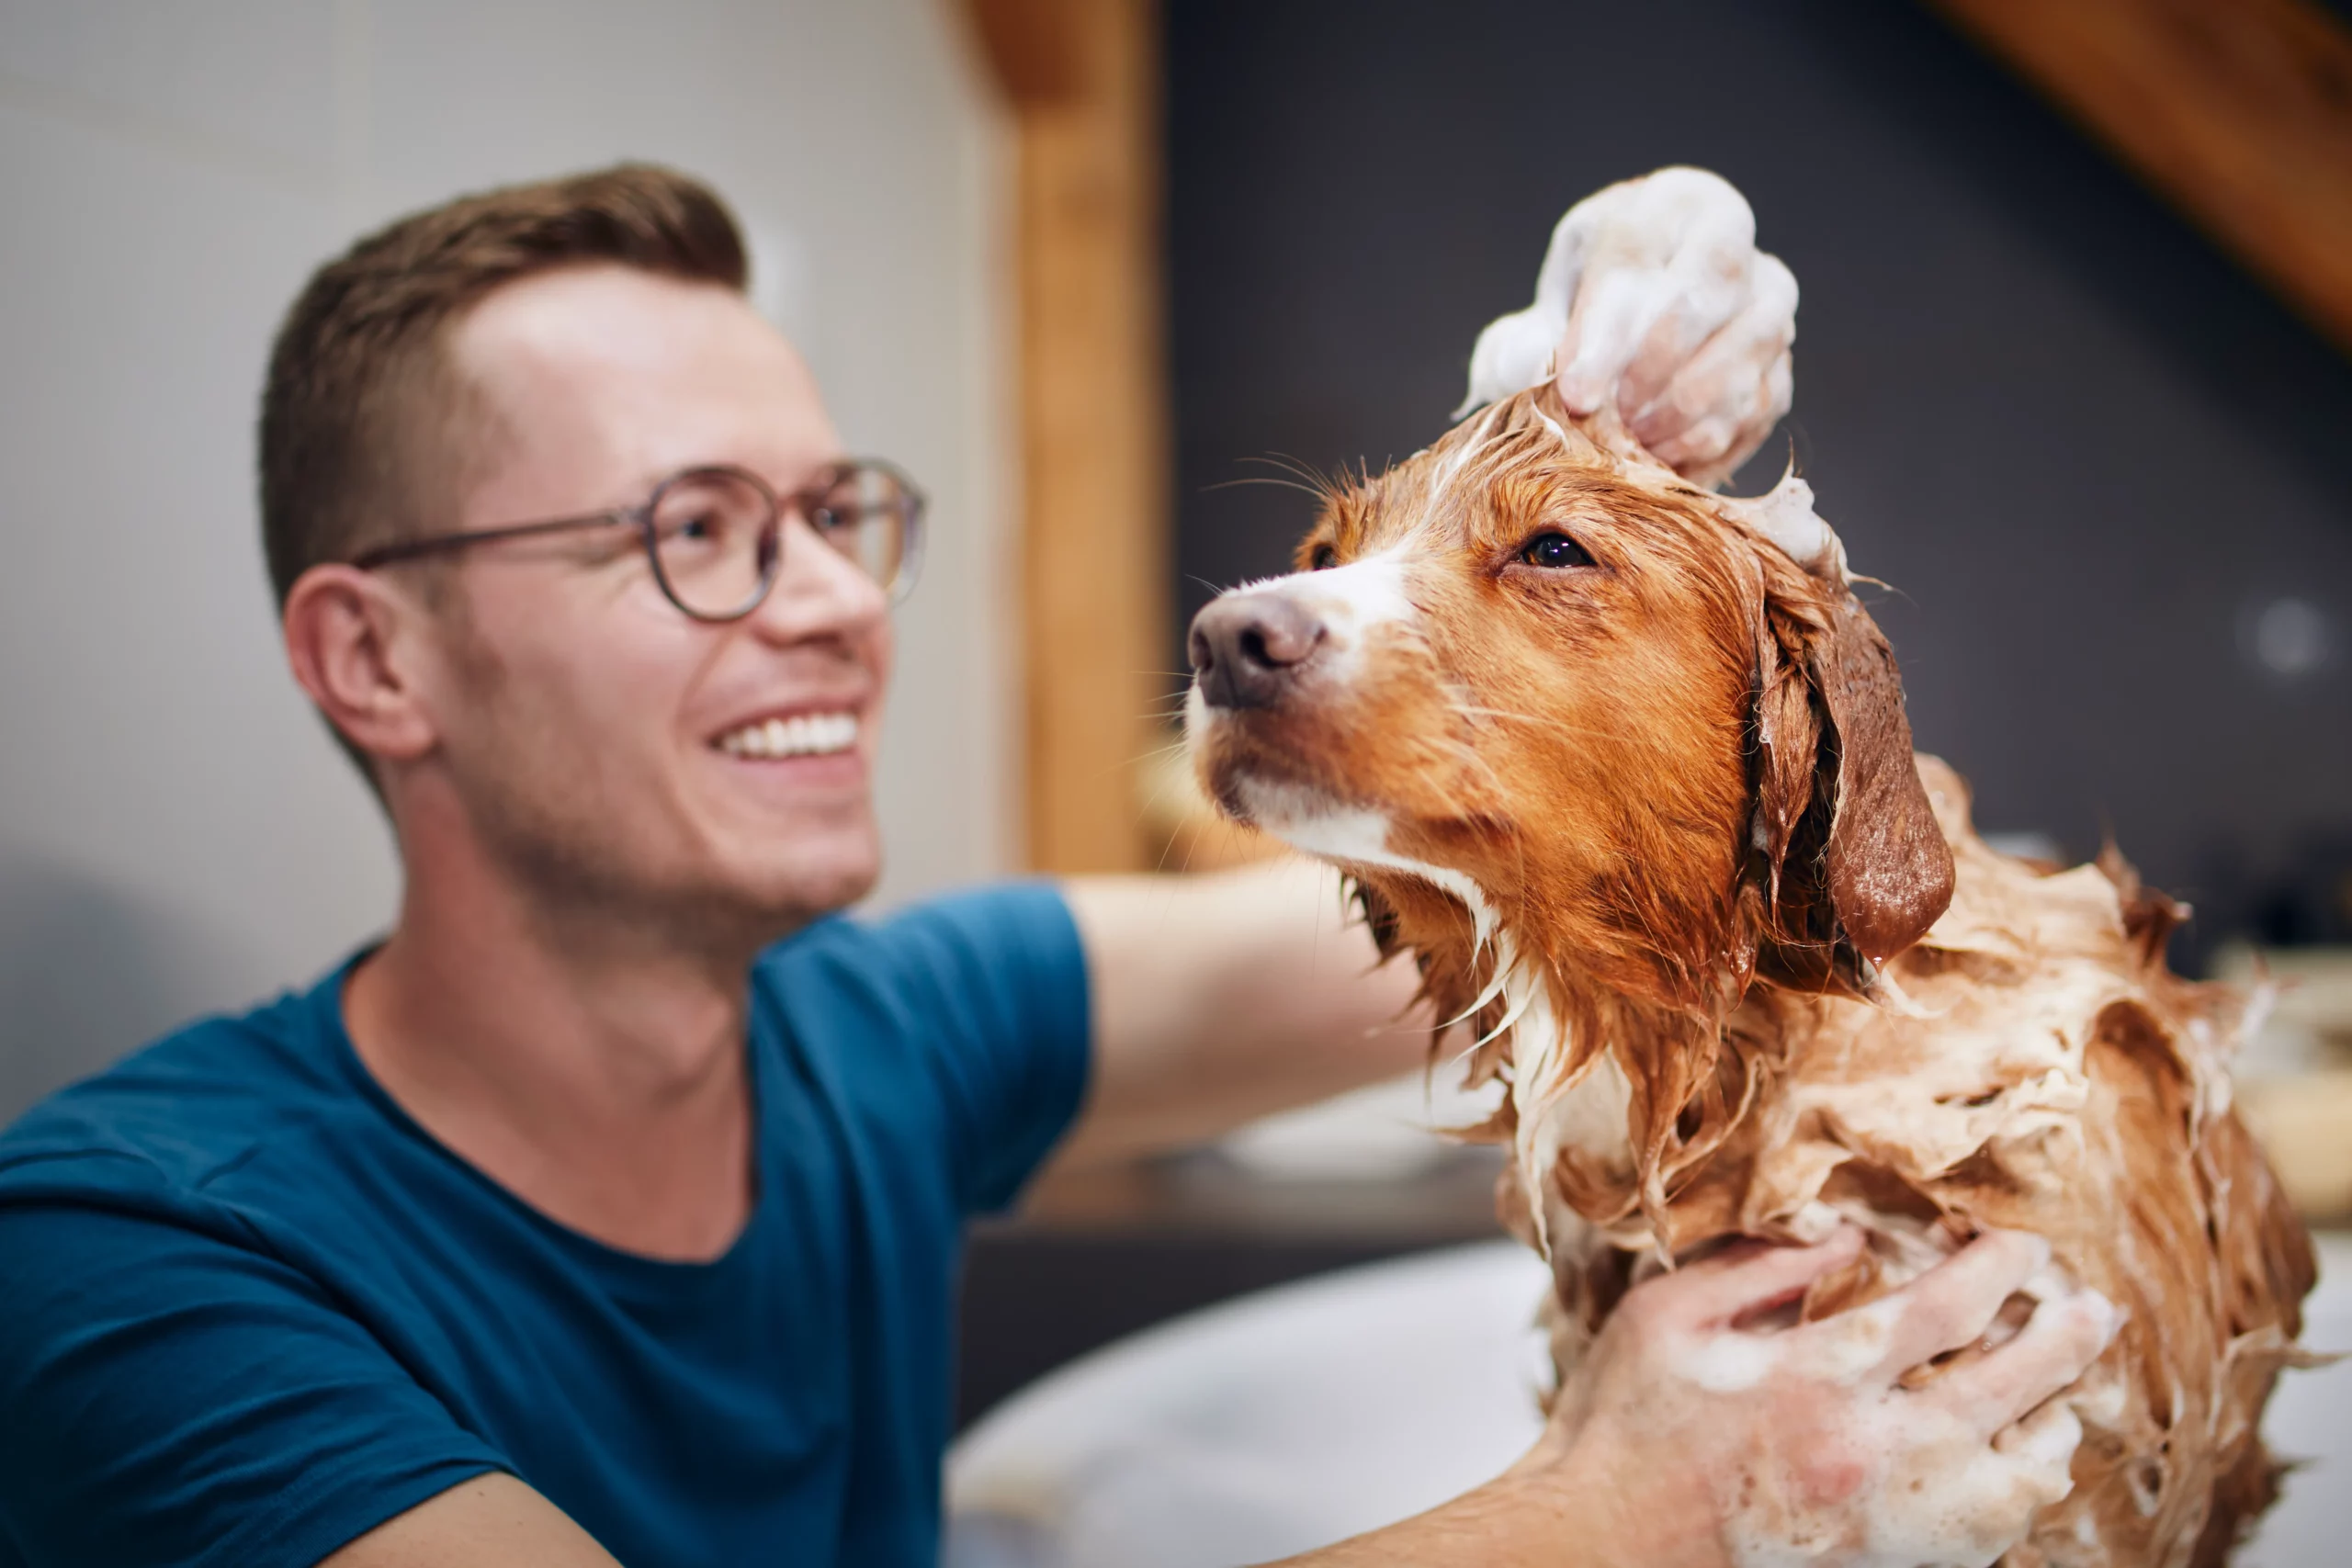 6 Easy Steps For Dog Grooming at Home